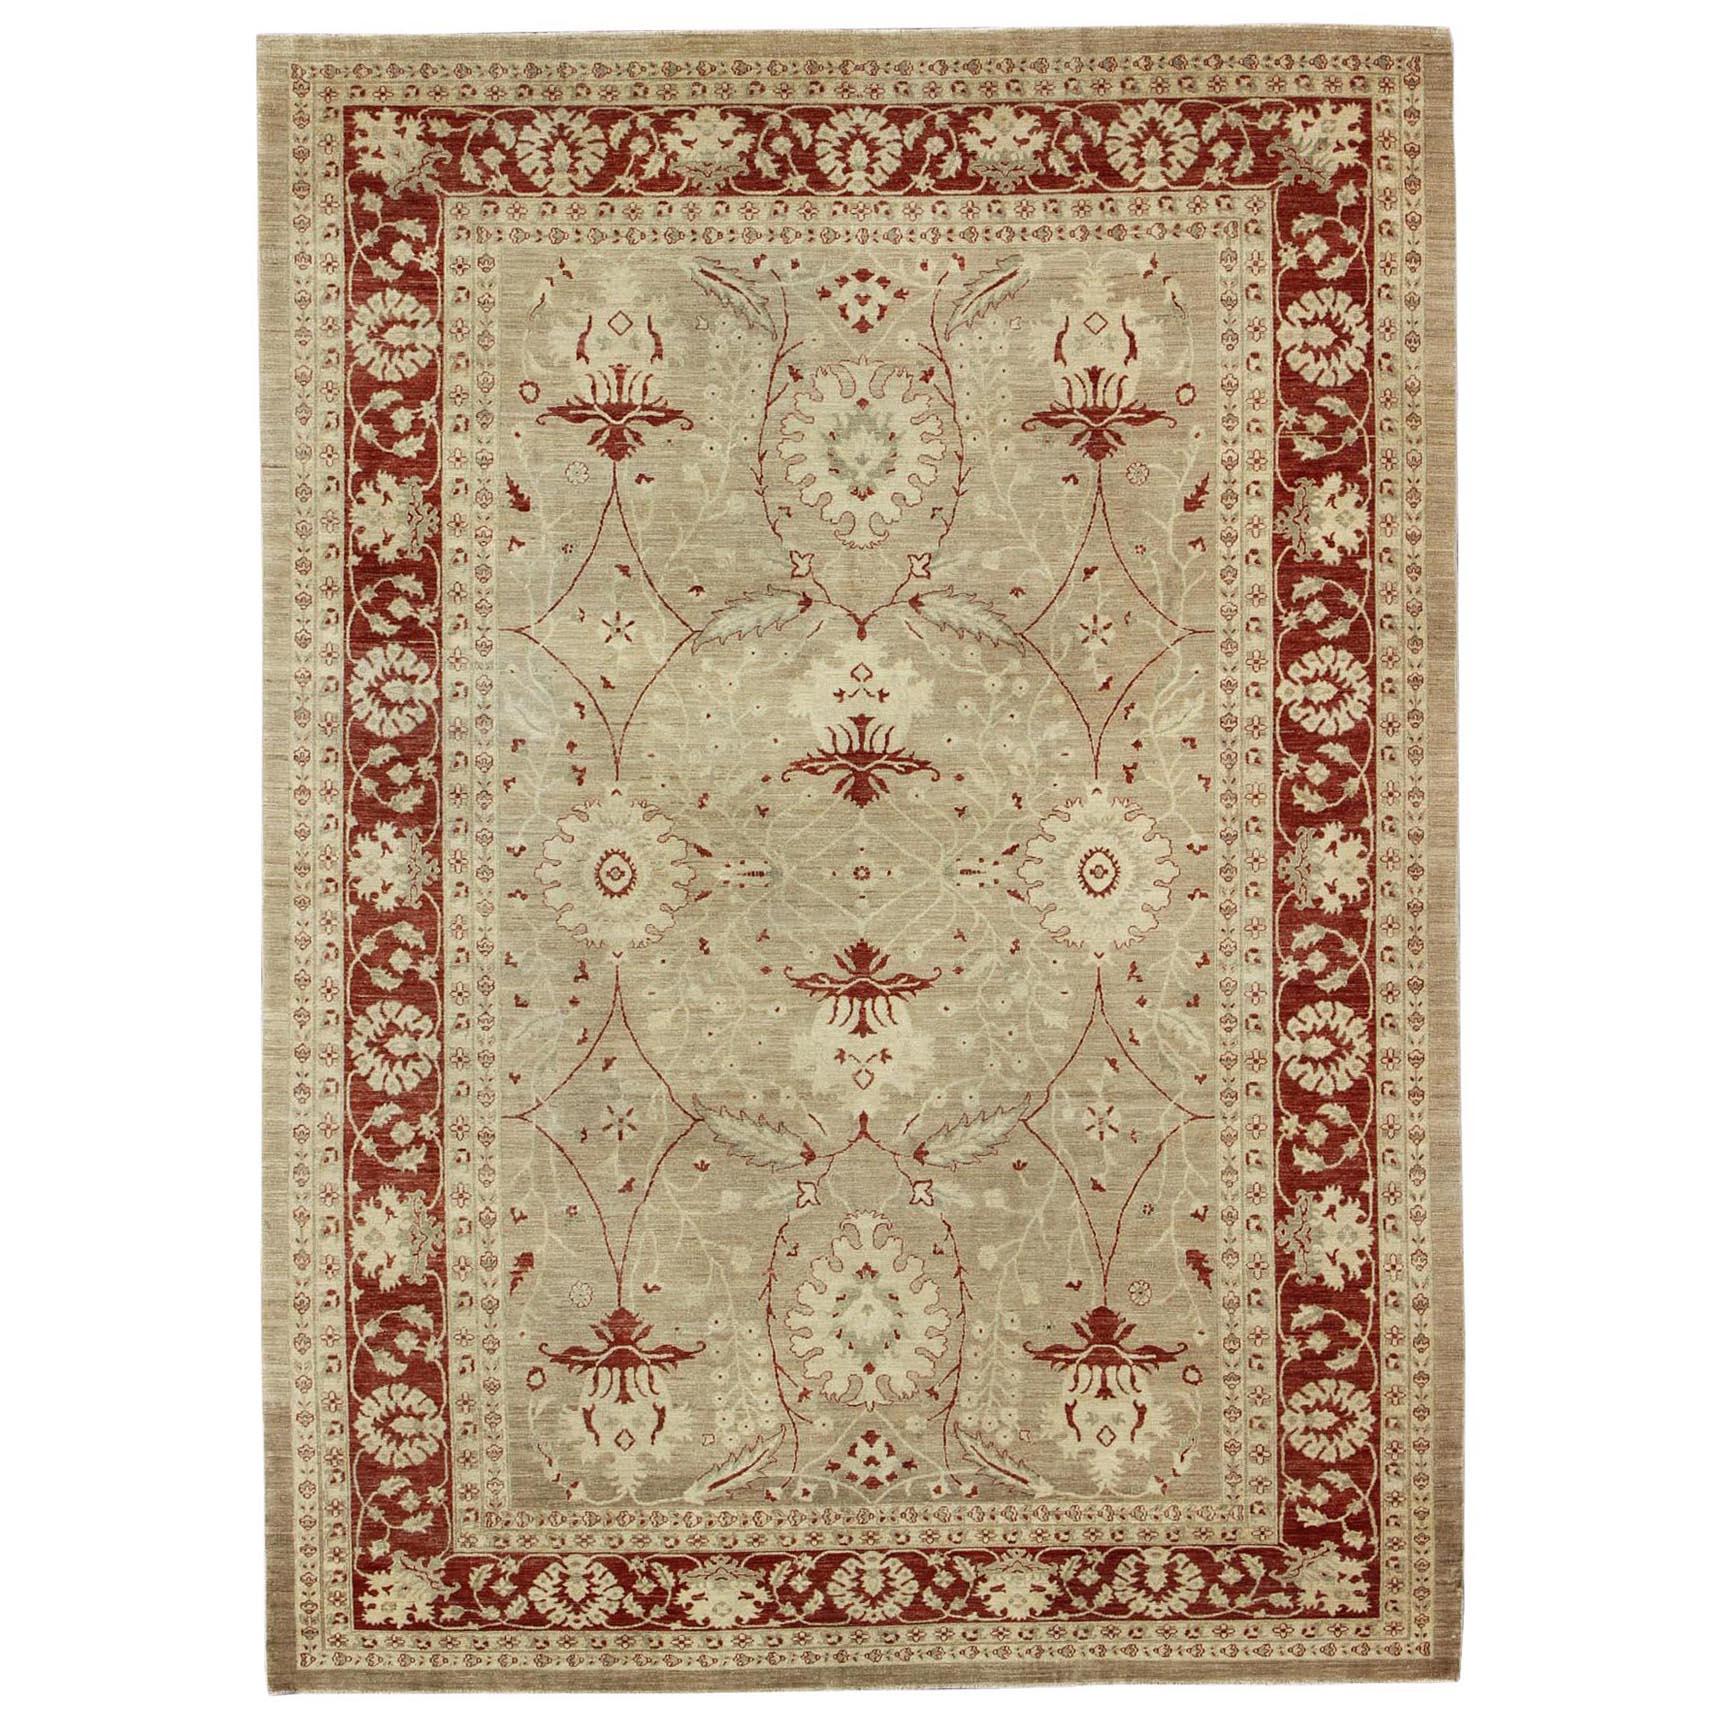 Sultanabad Design Rug with Stylized Design in Light Camel, Cream & Garnet Red For Sale